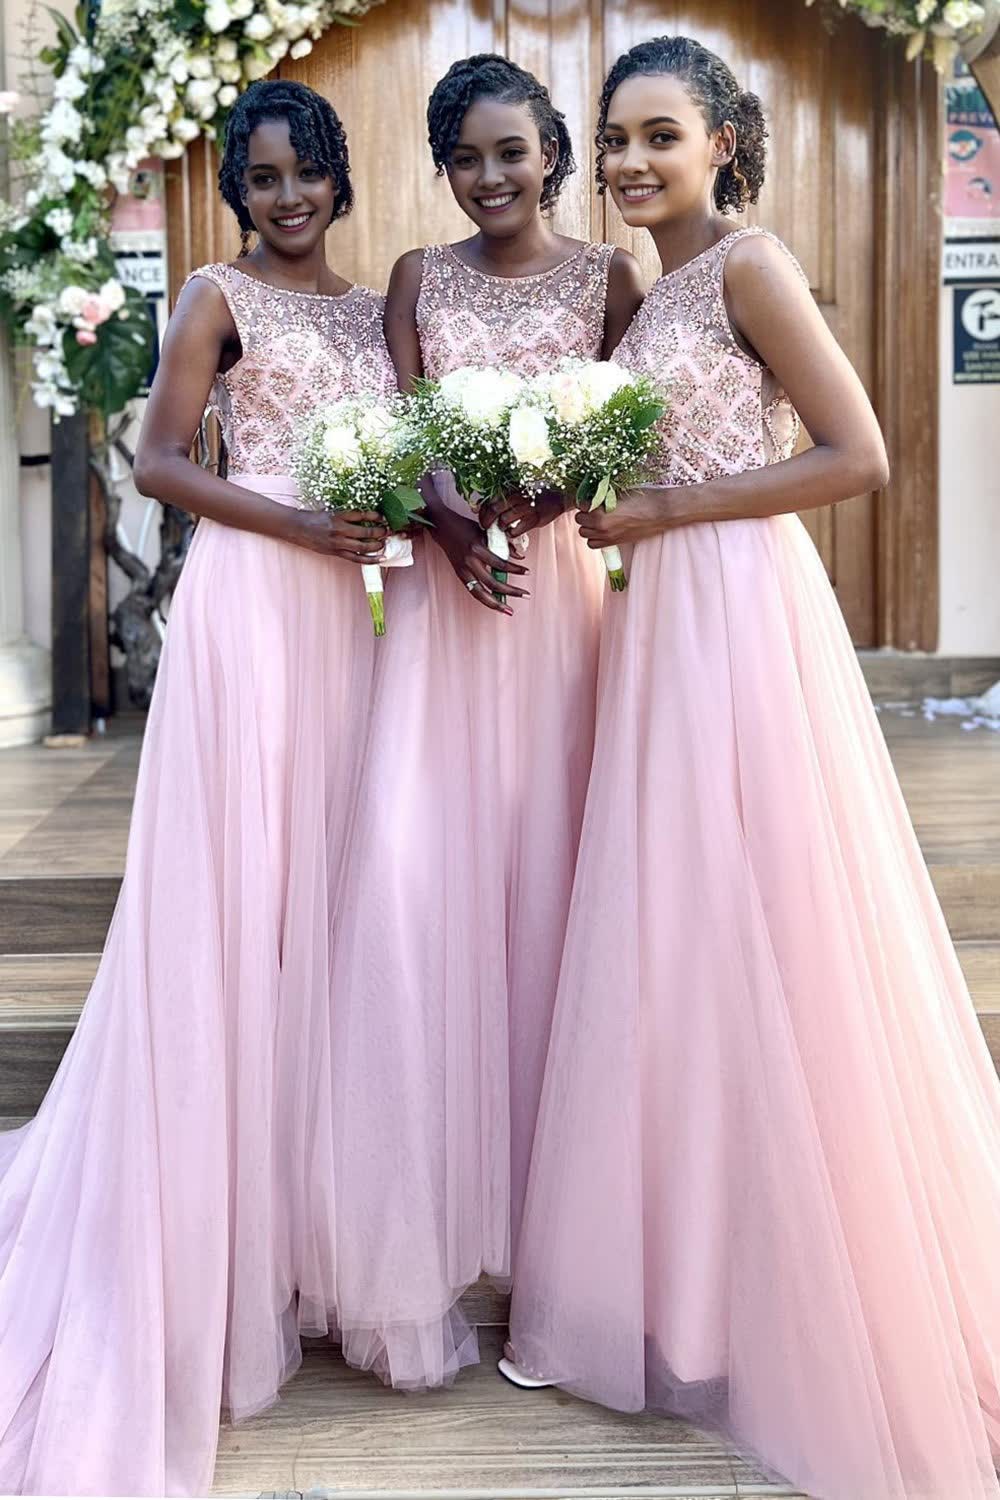 Sparkly Beaded Long Tulle Corset Bridesmaid Corset Prom Dress outfits, Sparkly Beaded Long Tulle Bridesmaid Prom Dress